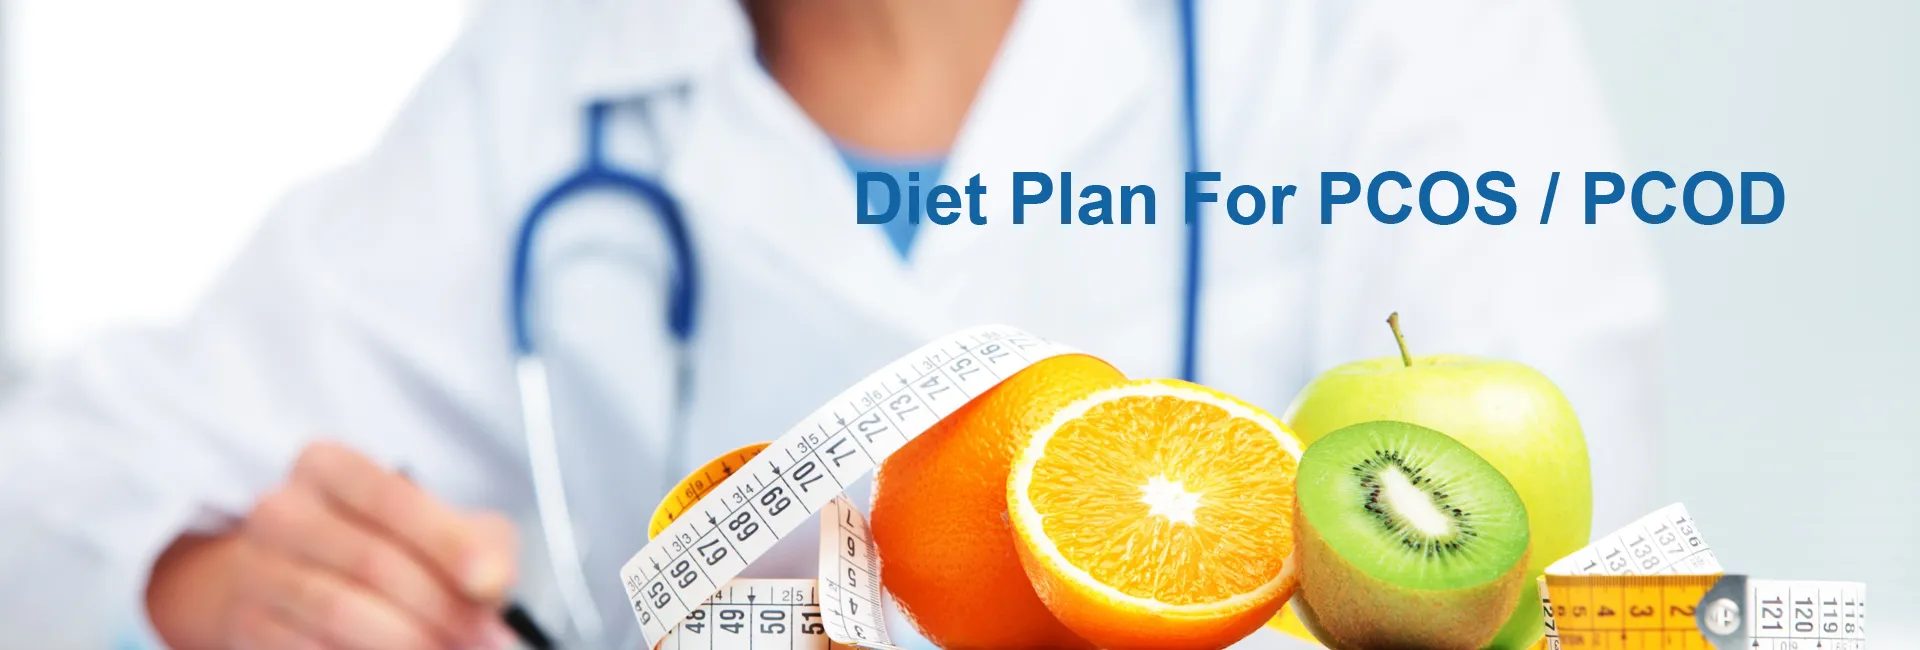 Diet Plan For PCOS / PCOD In Abbotsford